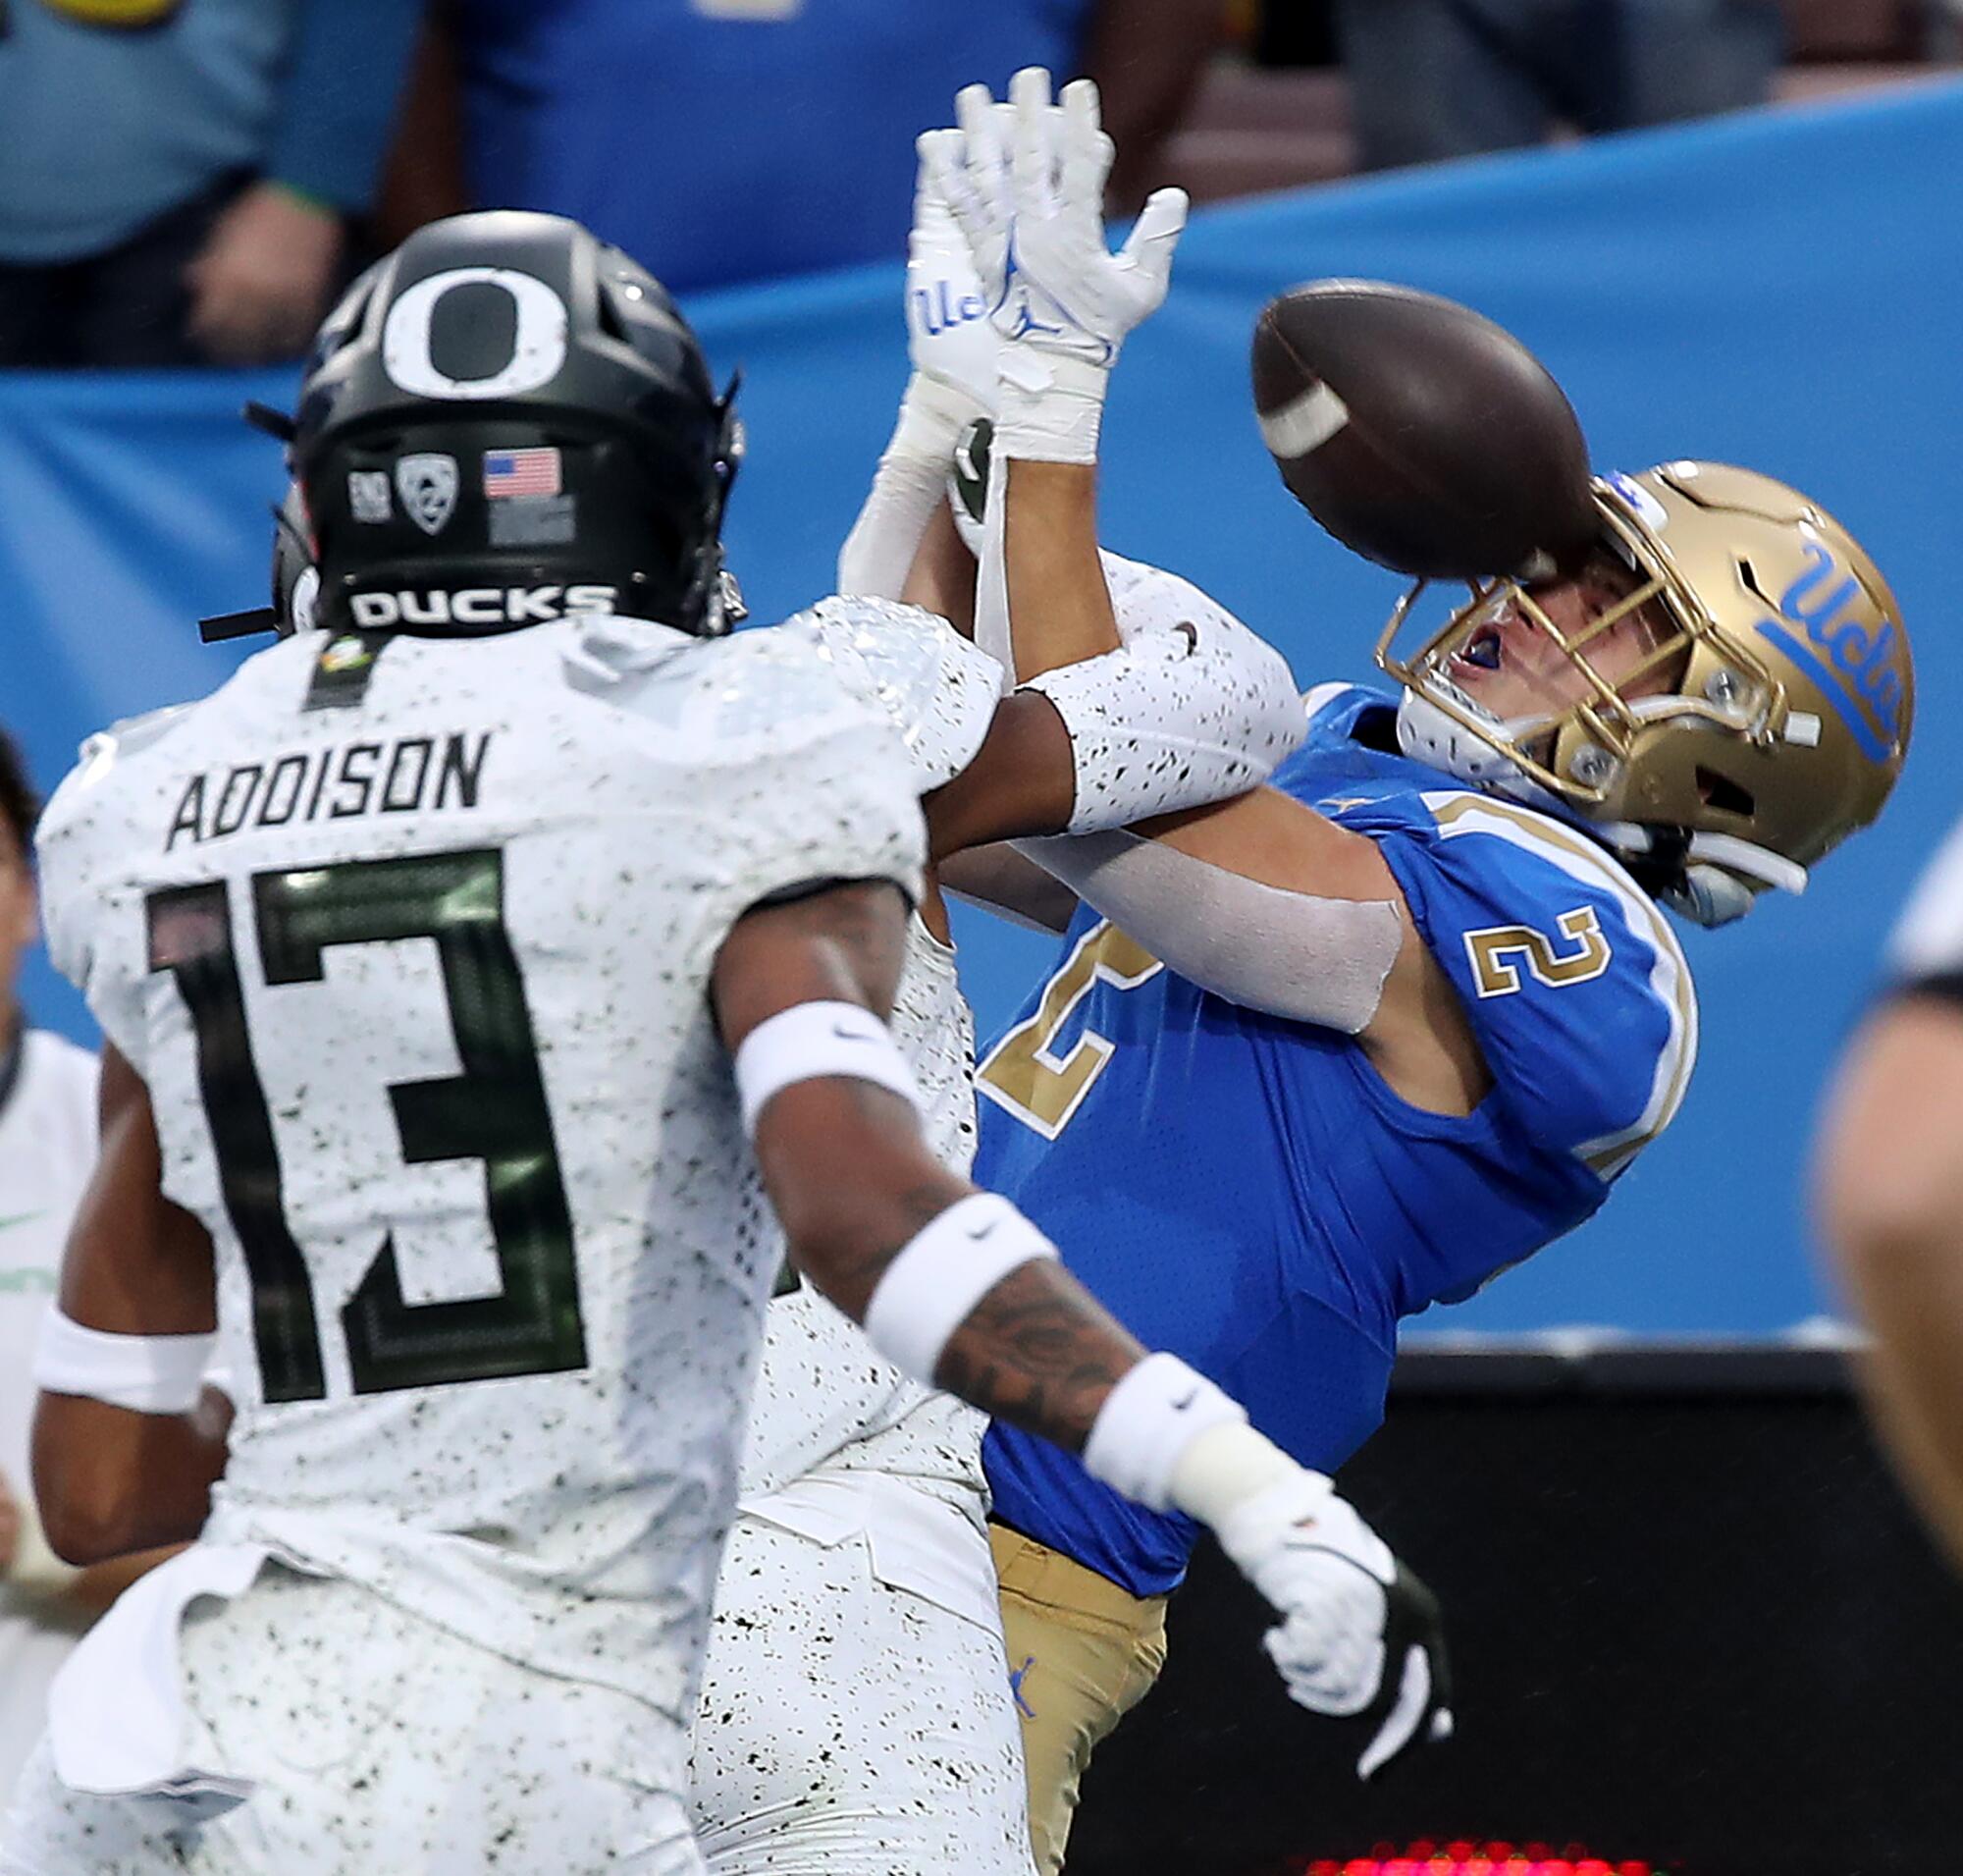  UCLA wide receiver Kyle Philips can't pull in a pass.